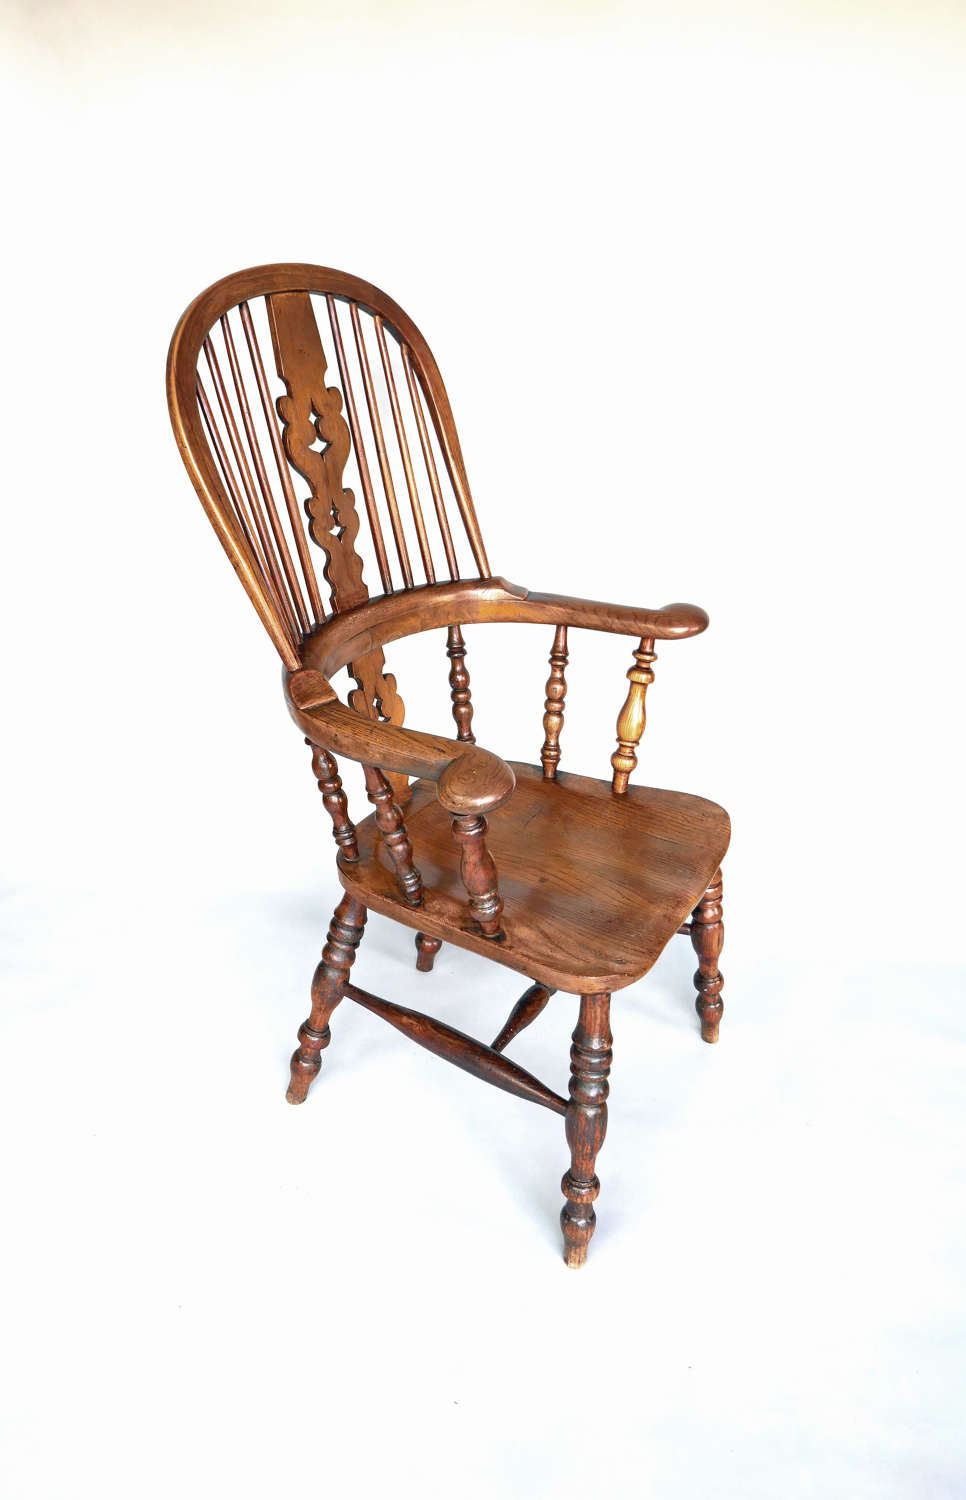 Antique Country Furniture 19thc Broad Arm Windsor Chair. English C1820